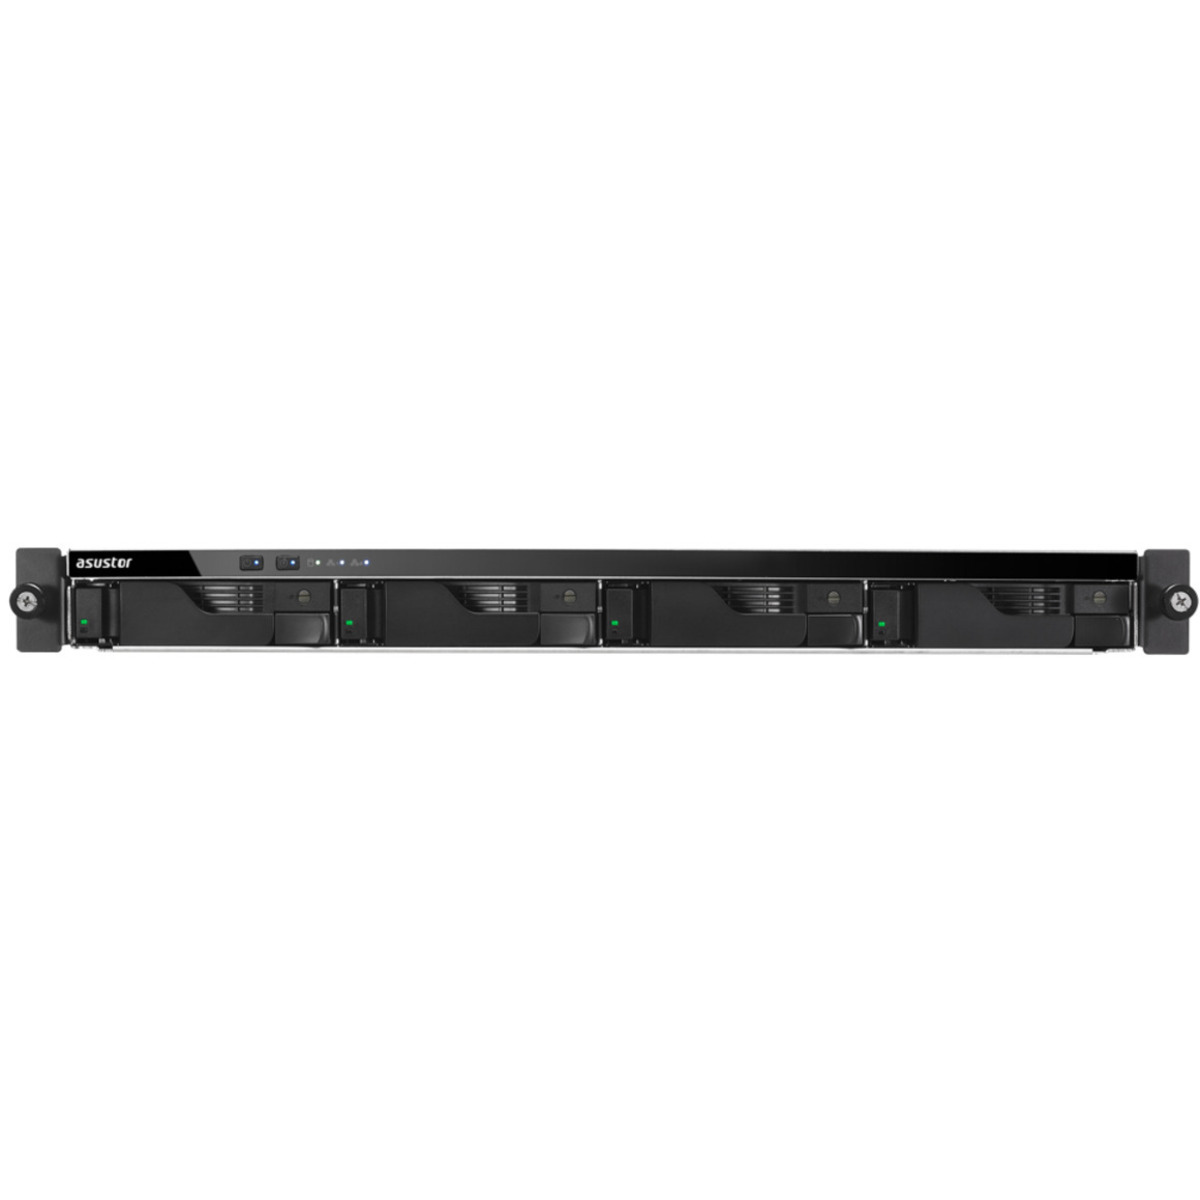 ASUSTOR LOCKERSTOR 4RS AS6504RS 20tb 4-Bay RackMount Multimedia / Power User / Business NAS - Network Attached Storage Device 2x10tb Seagate EXOS X18 ST10000NM018G 3.5 7200rpm SATA 6Gb/s HDD ENTERPRISE Class Drives Installed - Burn-In Tested - FREE RAM UPGRADE LOCKERSTOR 4RS AS6504RS